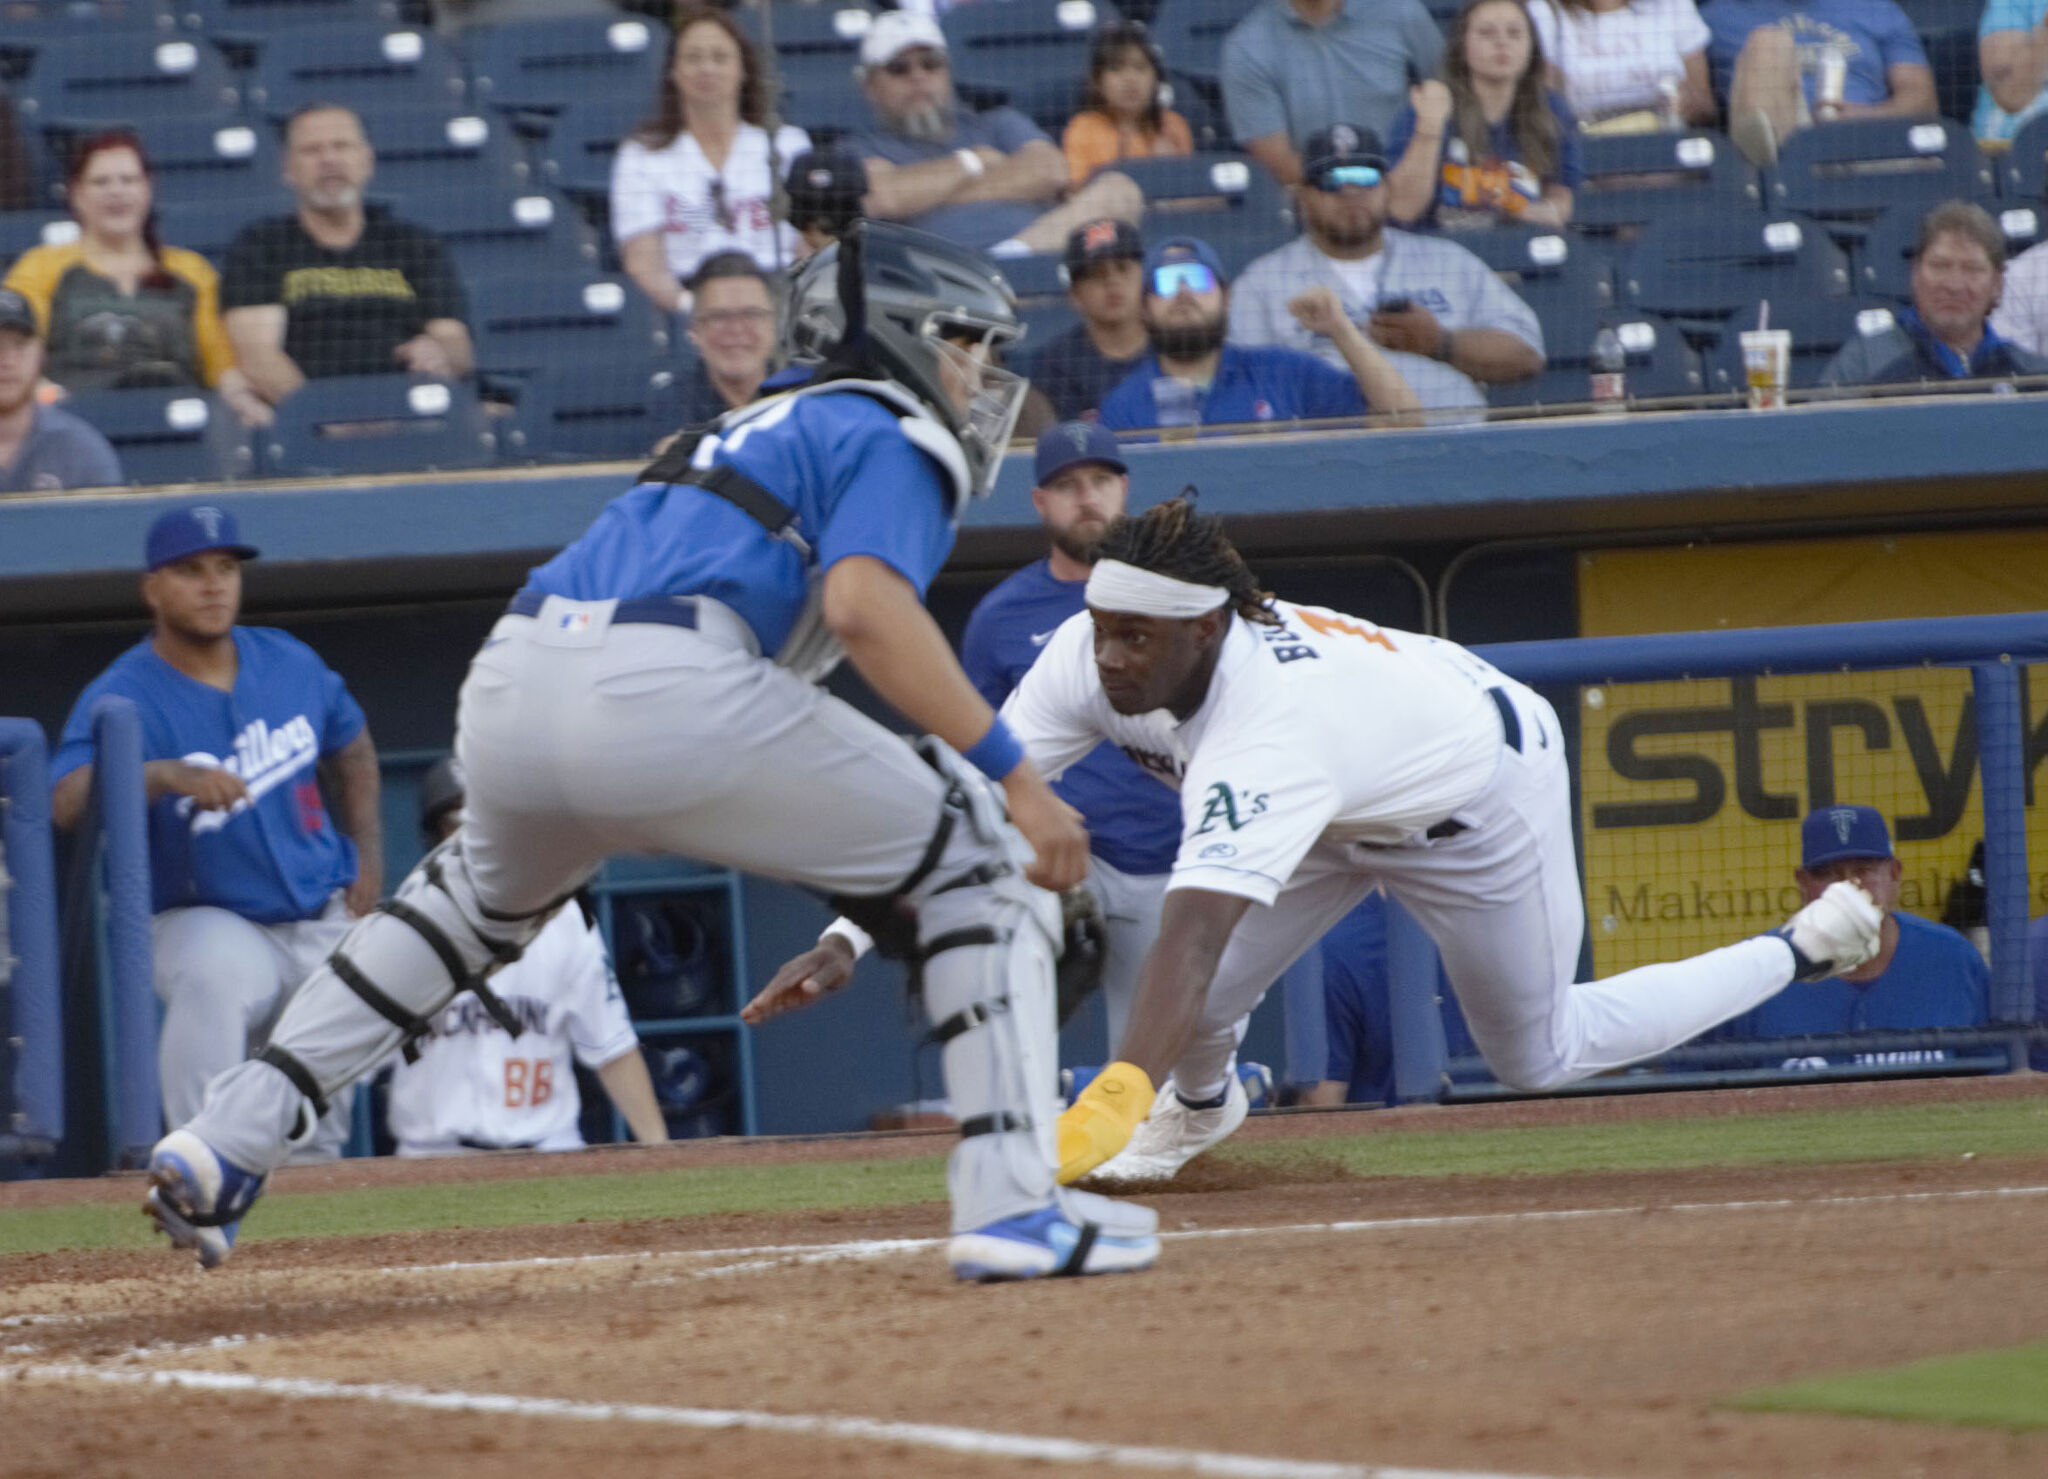 Fleet-footed RockHounds impact opener with speed